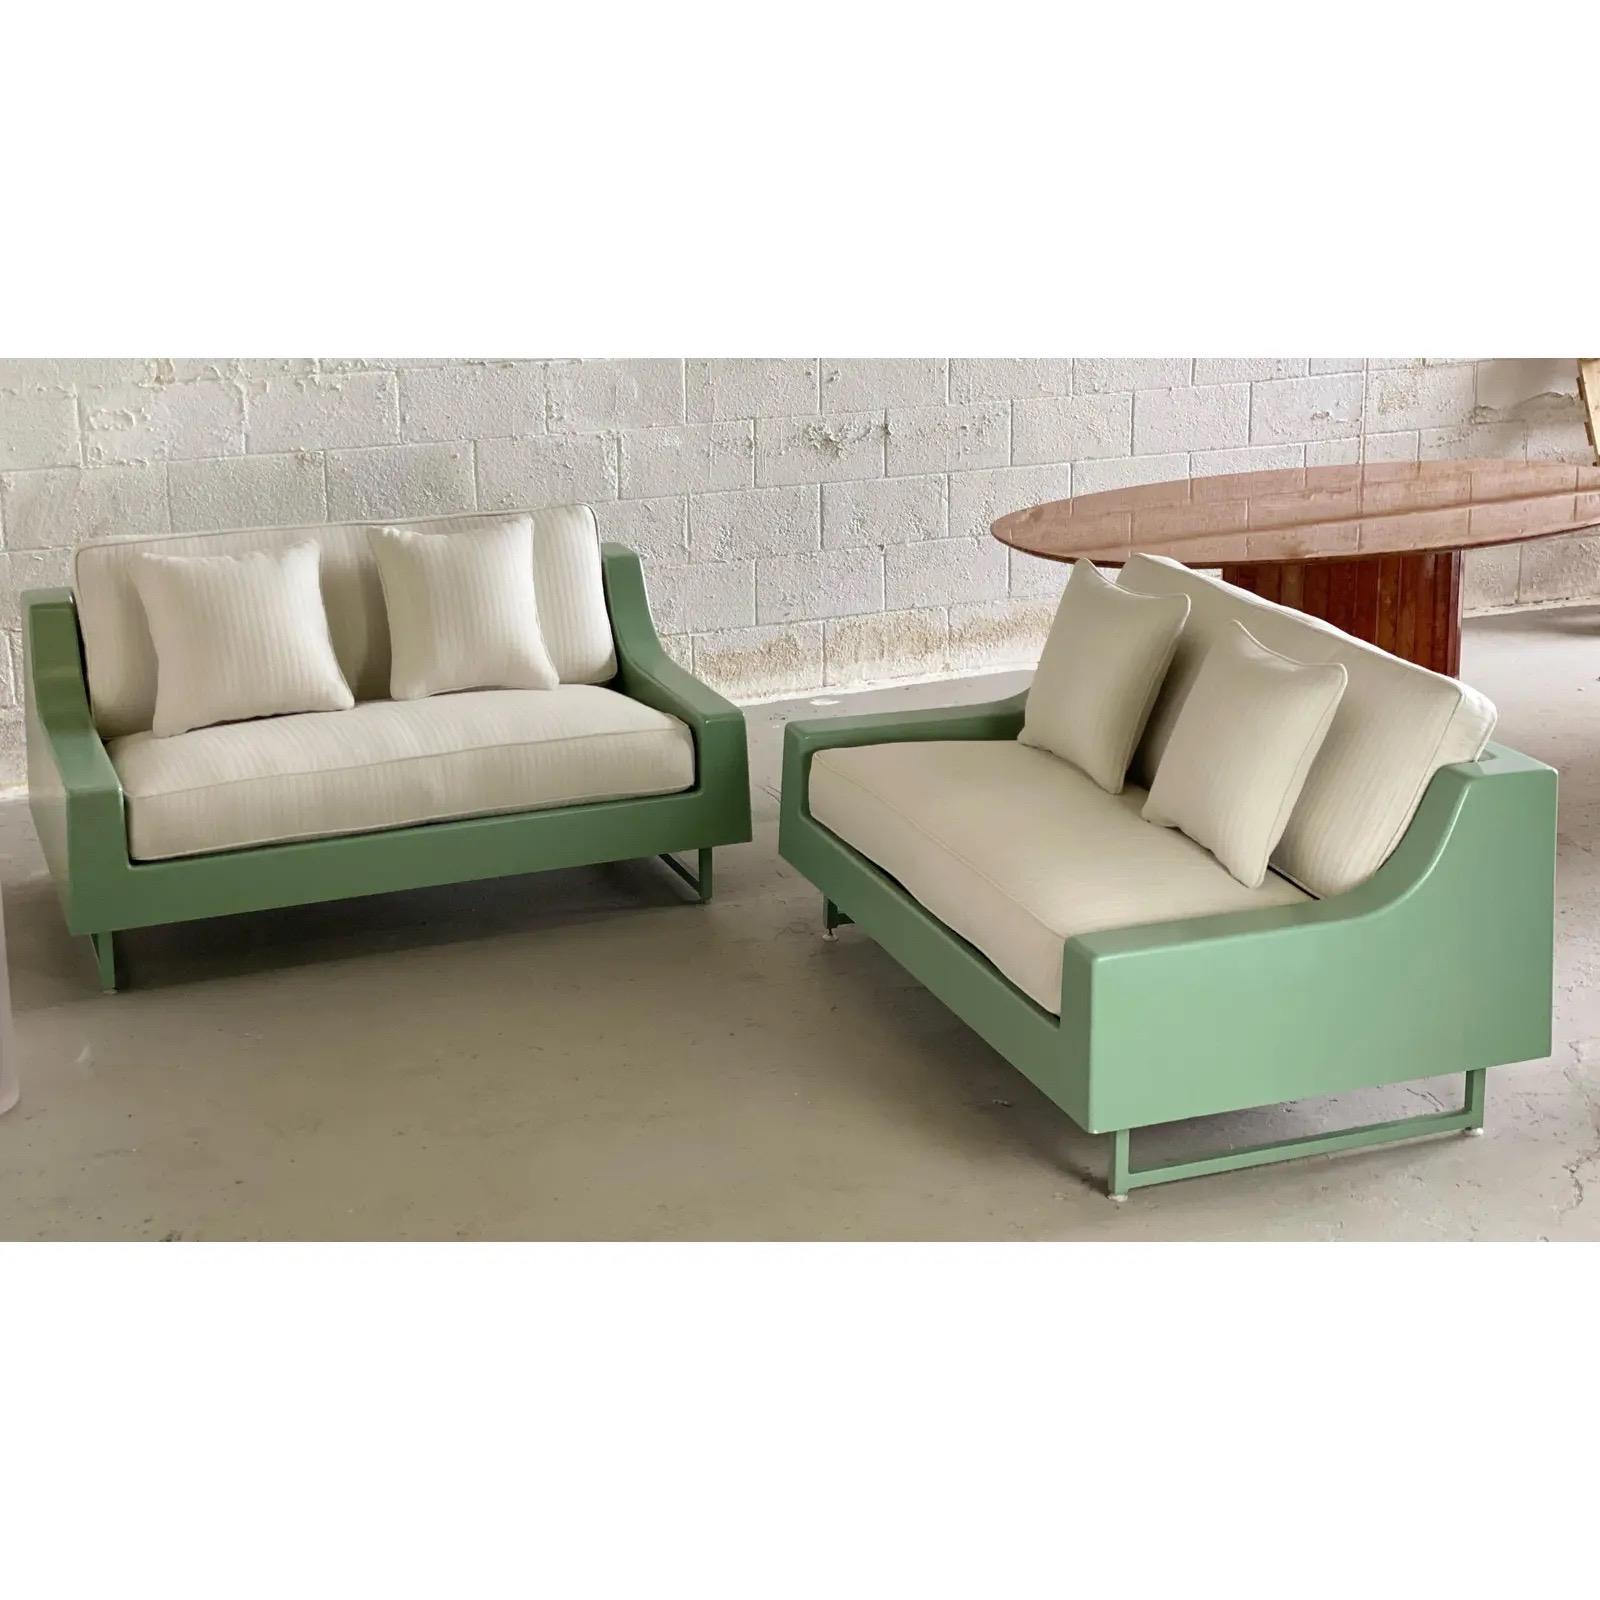 We are very pleased to offer a rare, modern pair of sofas by Homecrest, circa the 1960s. This super sleek pair showcases an outdoor shell made of fiberglass and impregnated with polyester resin. A steel frame is then secured around the inside